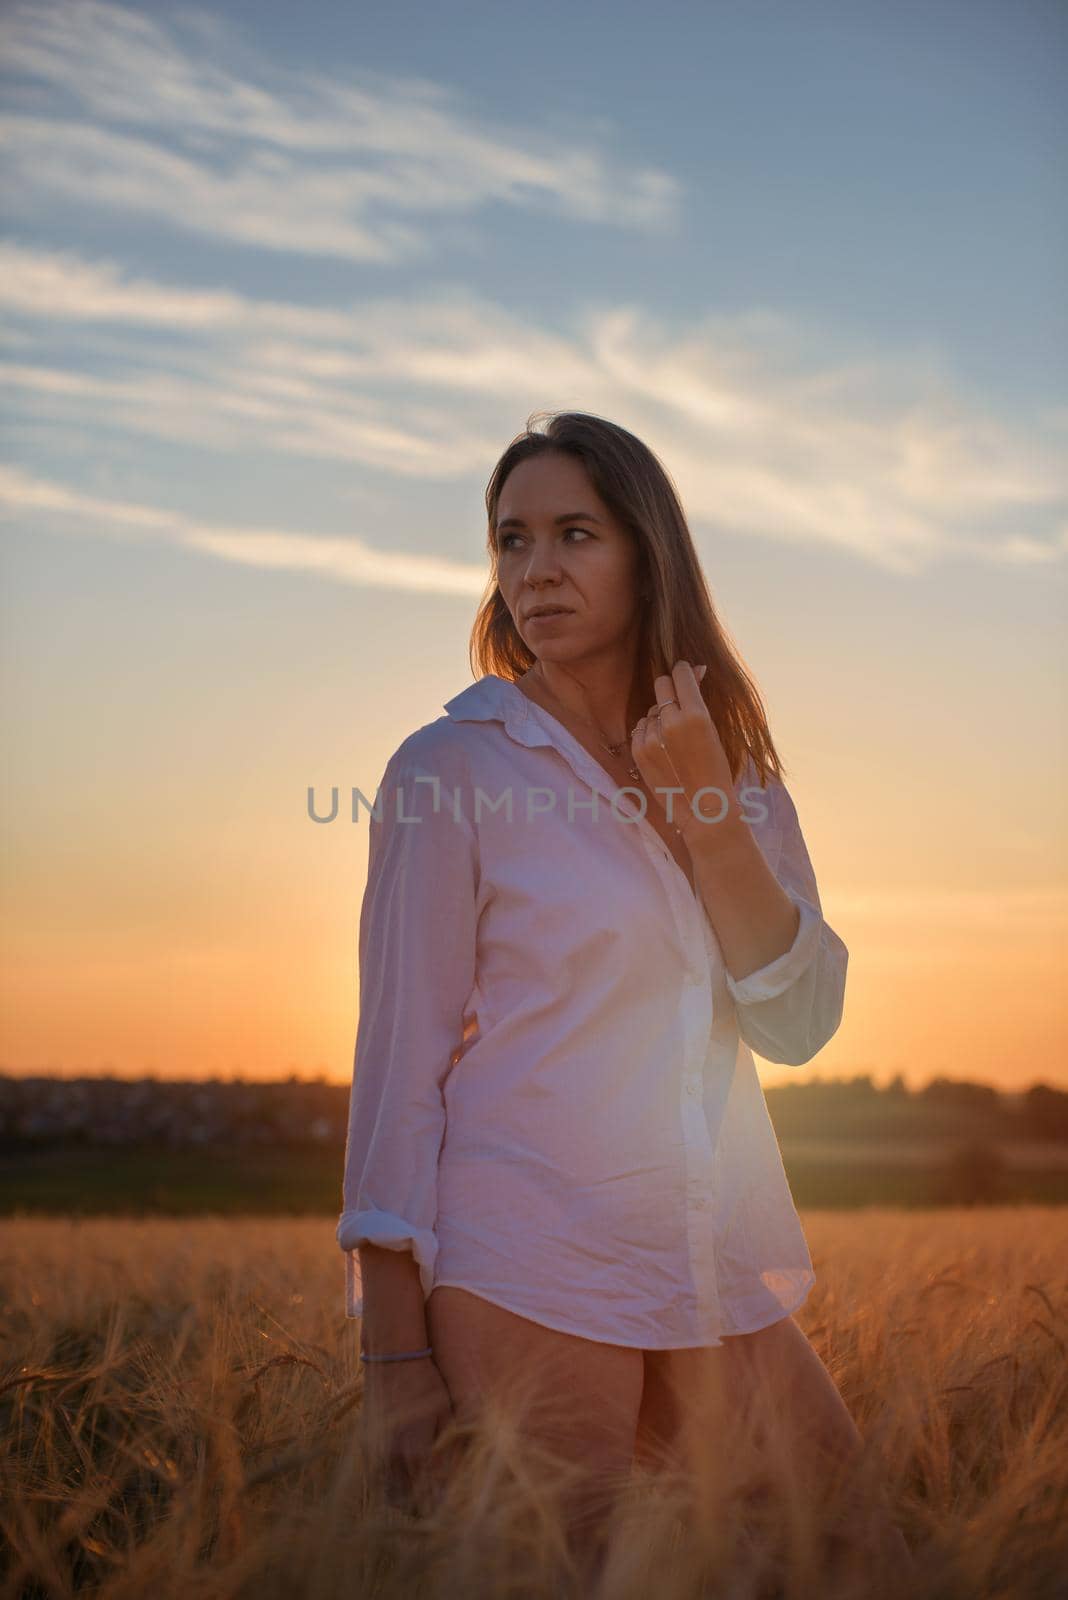 Woman in the yellow field of wheat, beauty summer sunset